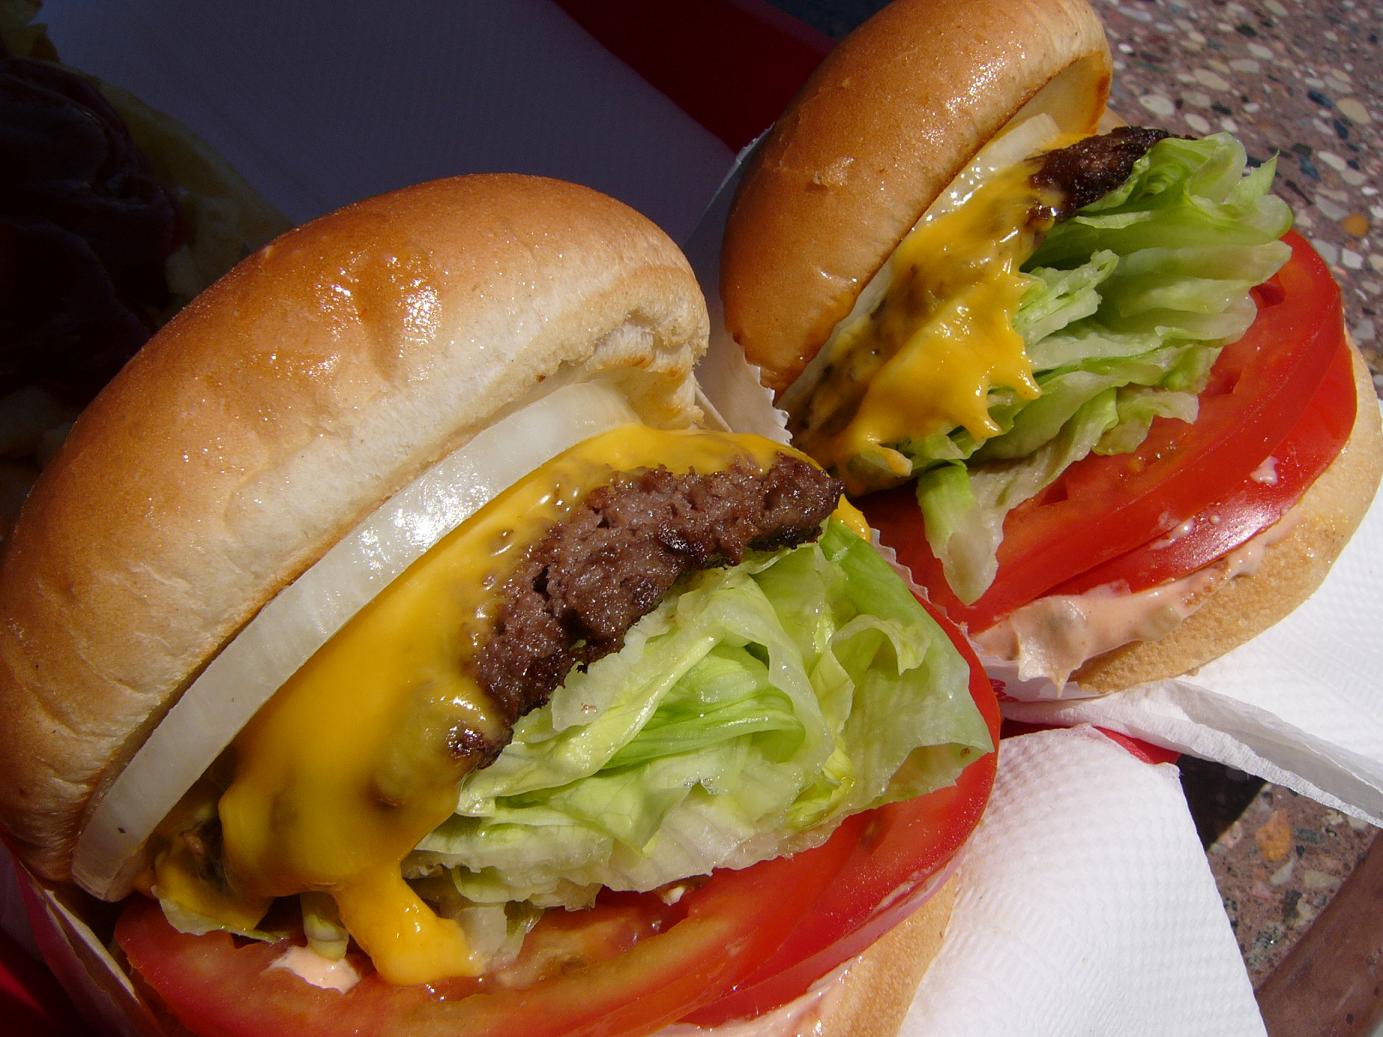 http://s5.picofile.com/file/8129319542/Flickr_jef_31871680_In_N_Out_Cheeseburgers.jpg